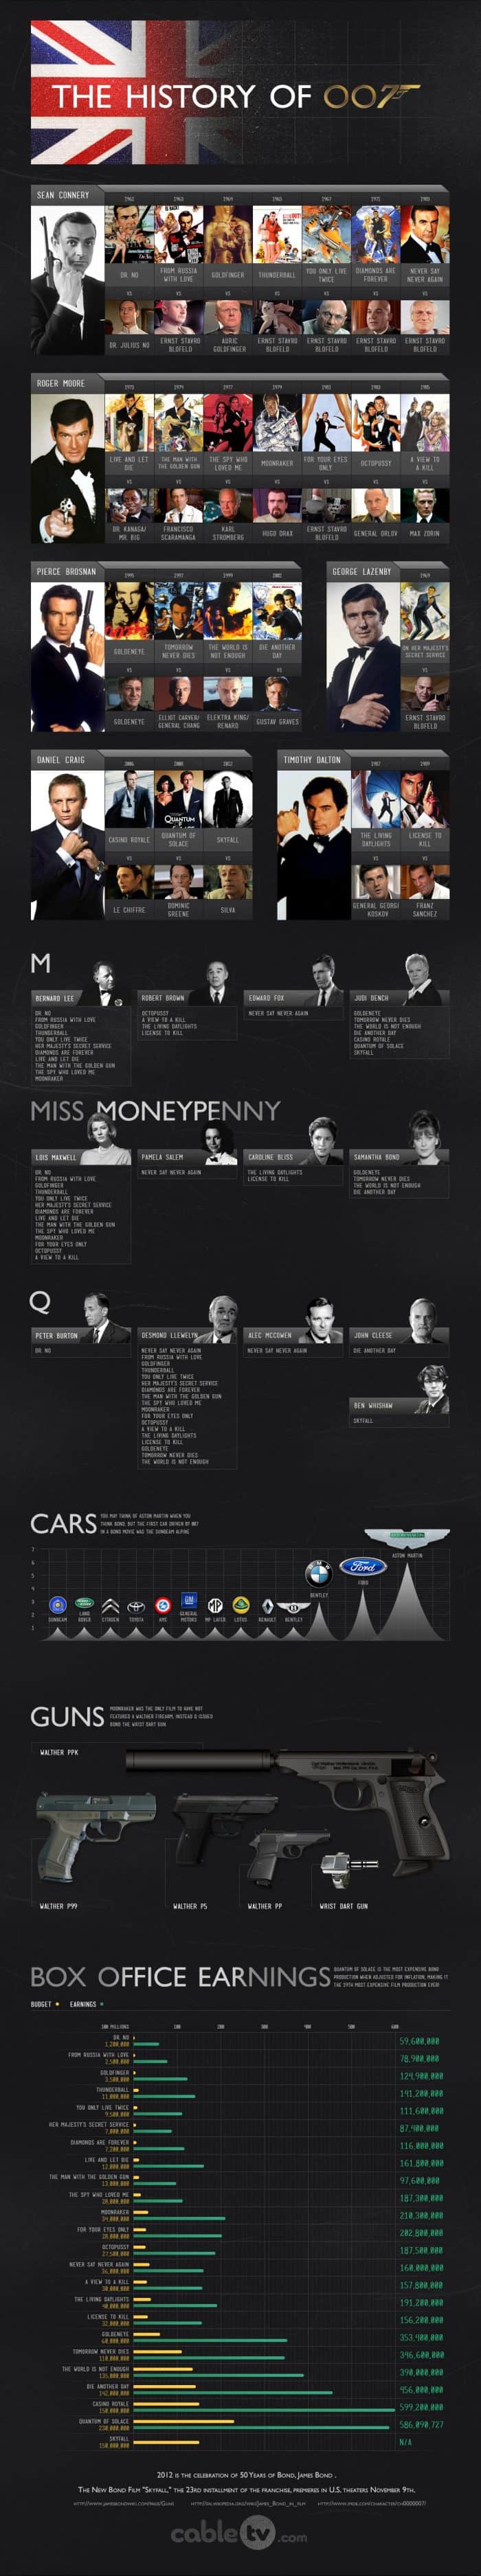 History of 007 Infographic